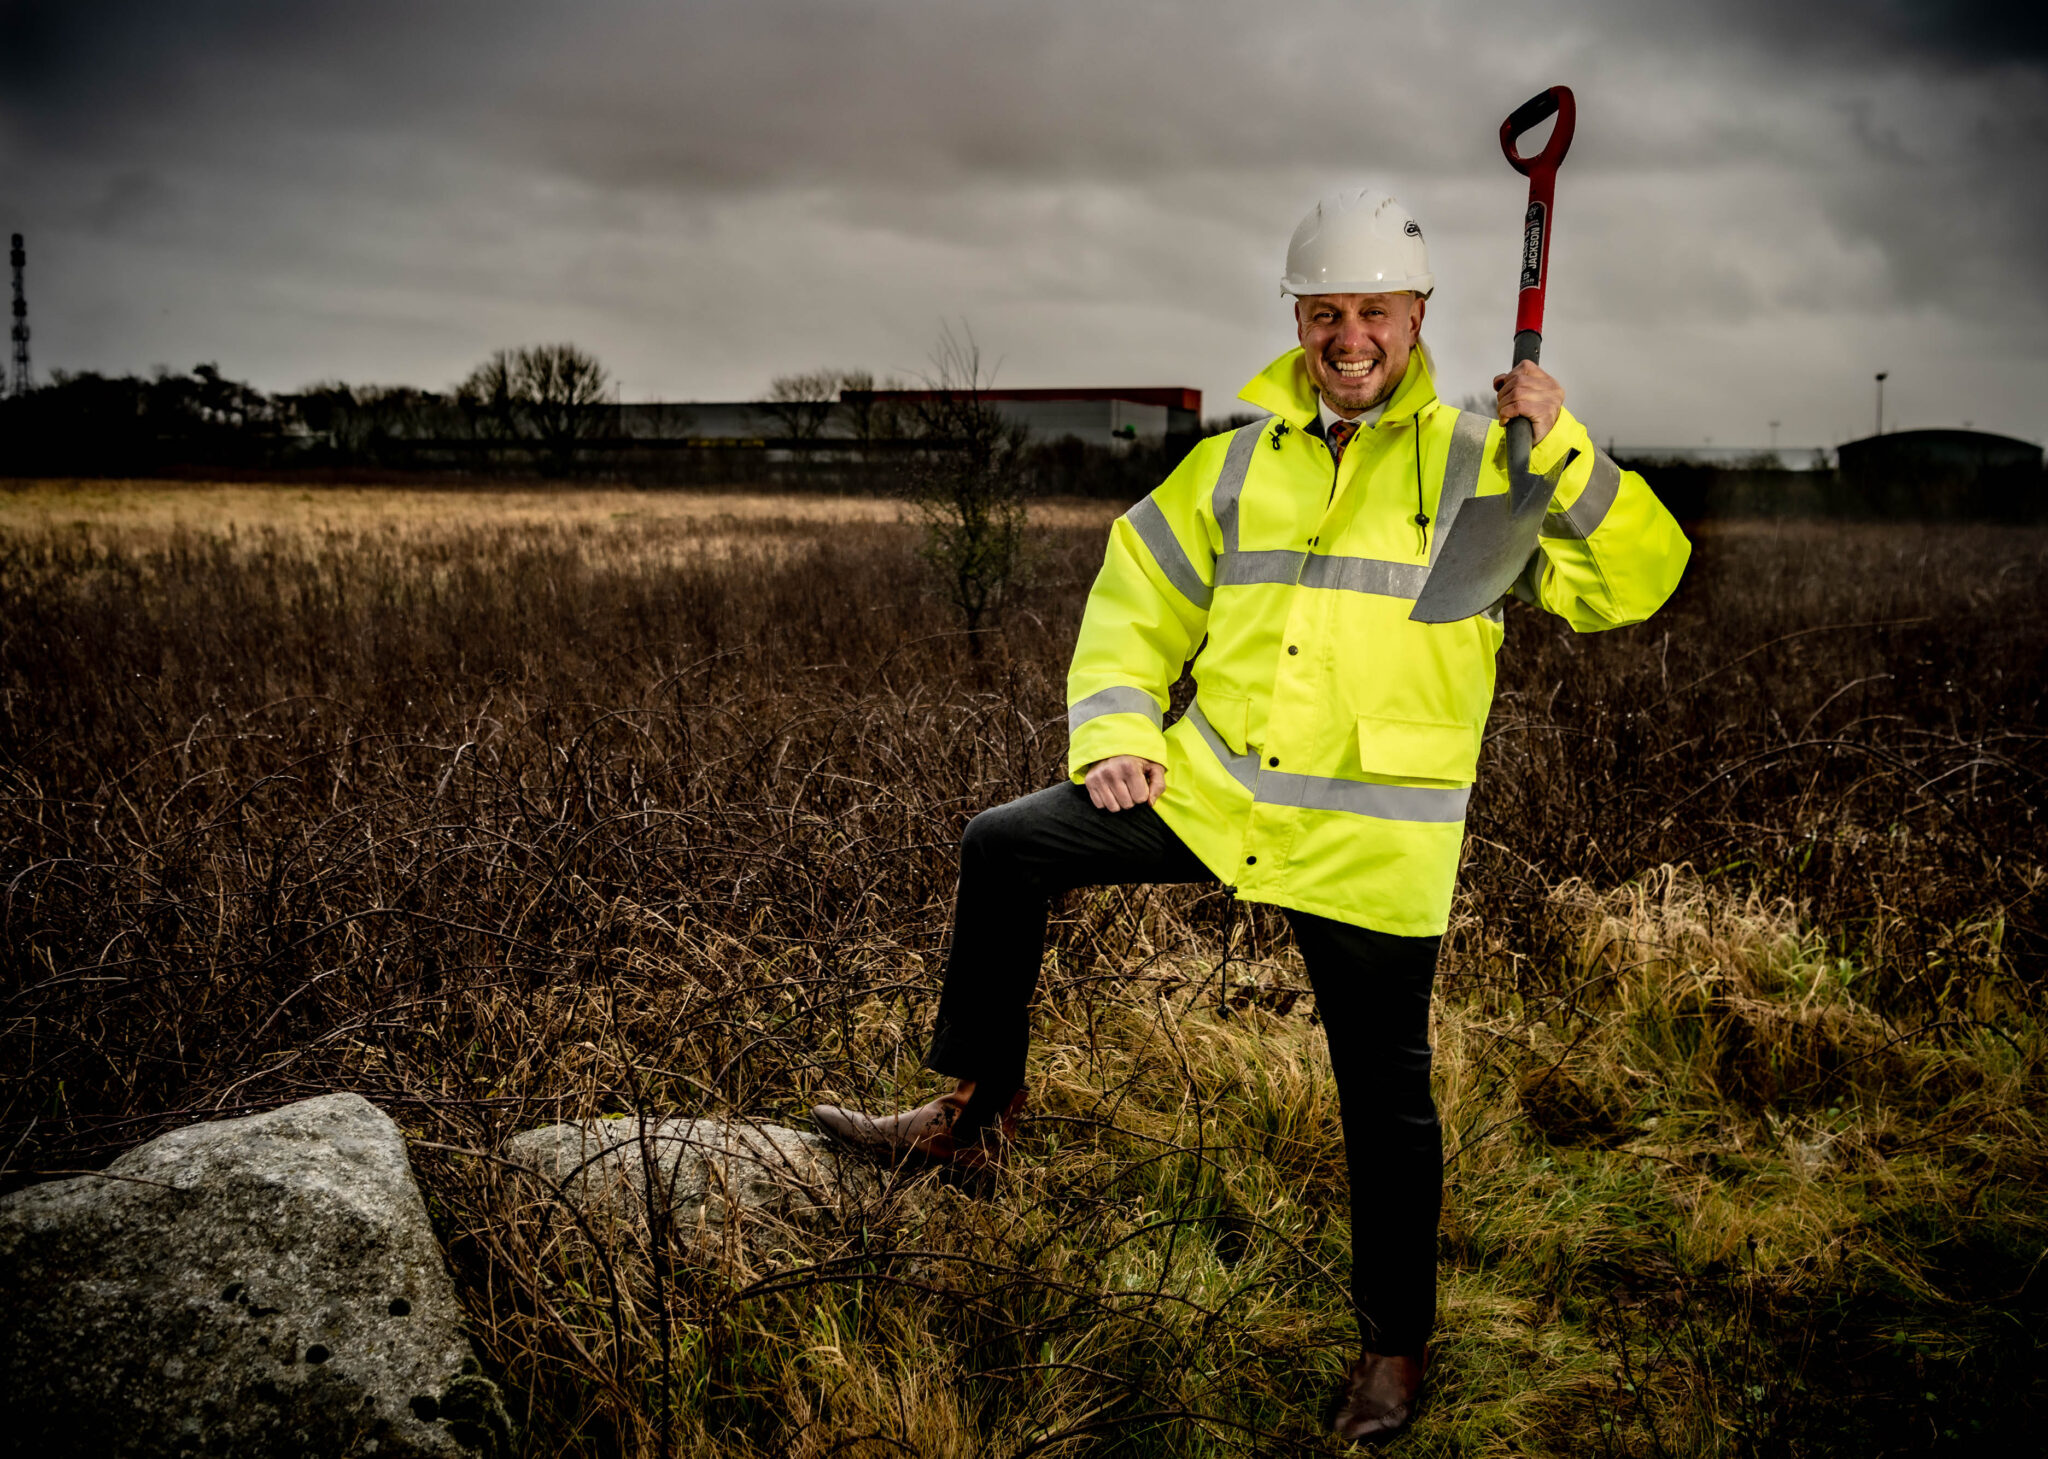 Chris Nattress, Lakes College principal, sports a hi-vis jacket and hard hat as he celebrates the approval of the college's new multi-million pound Civil Engineering Training Centre. He is seen at the site of the new build, holding a spade and grinning.